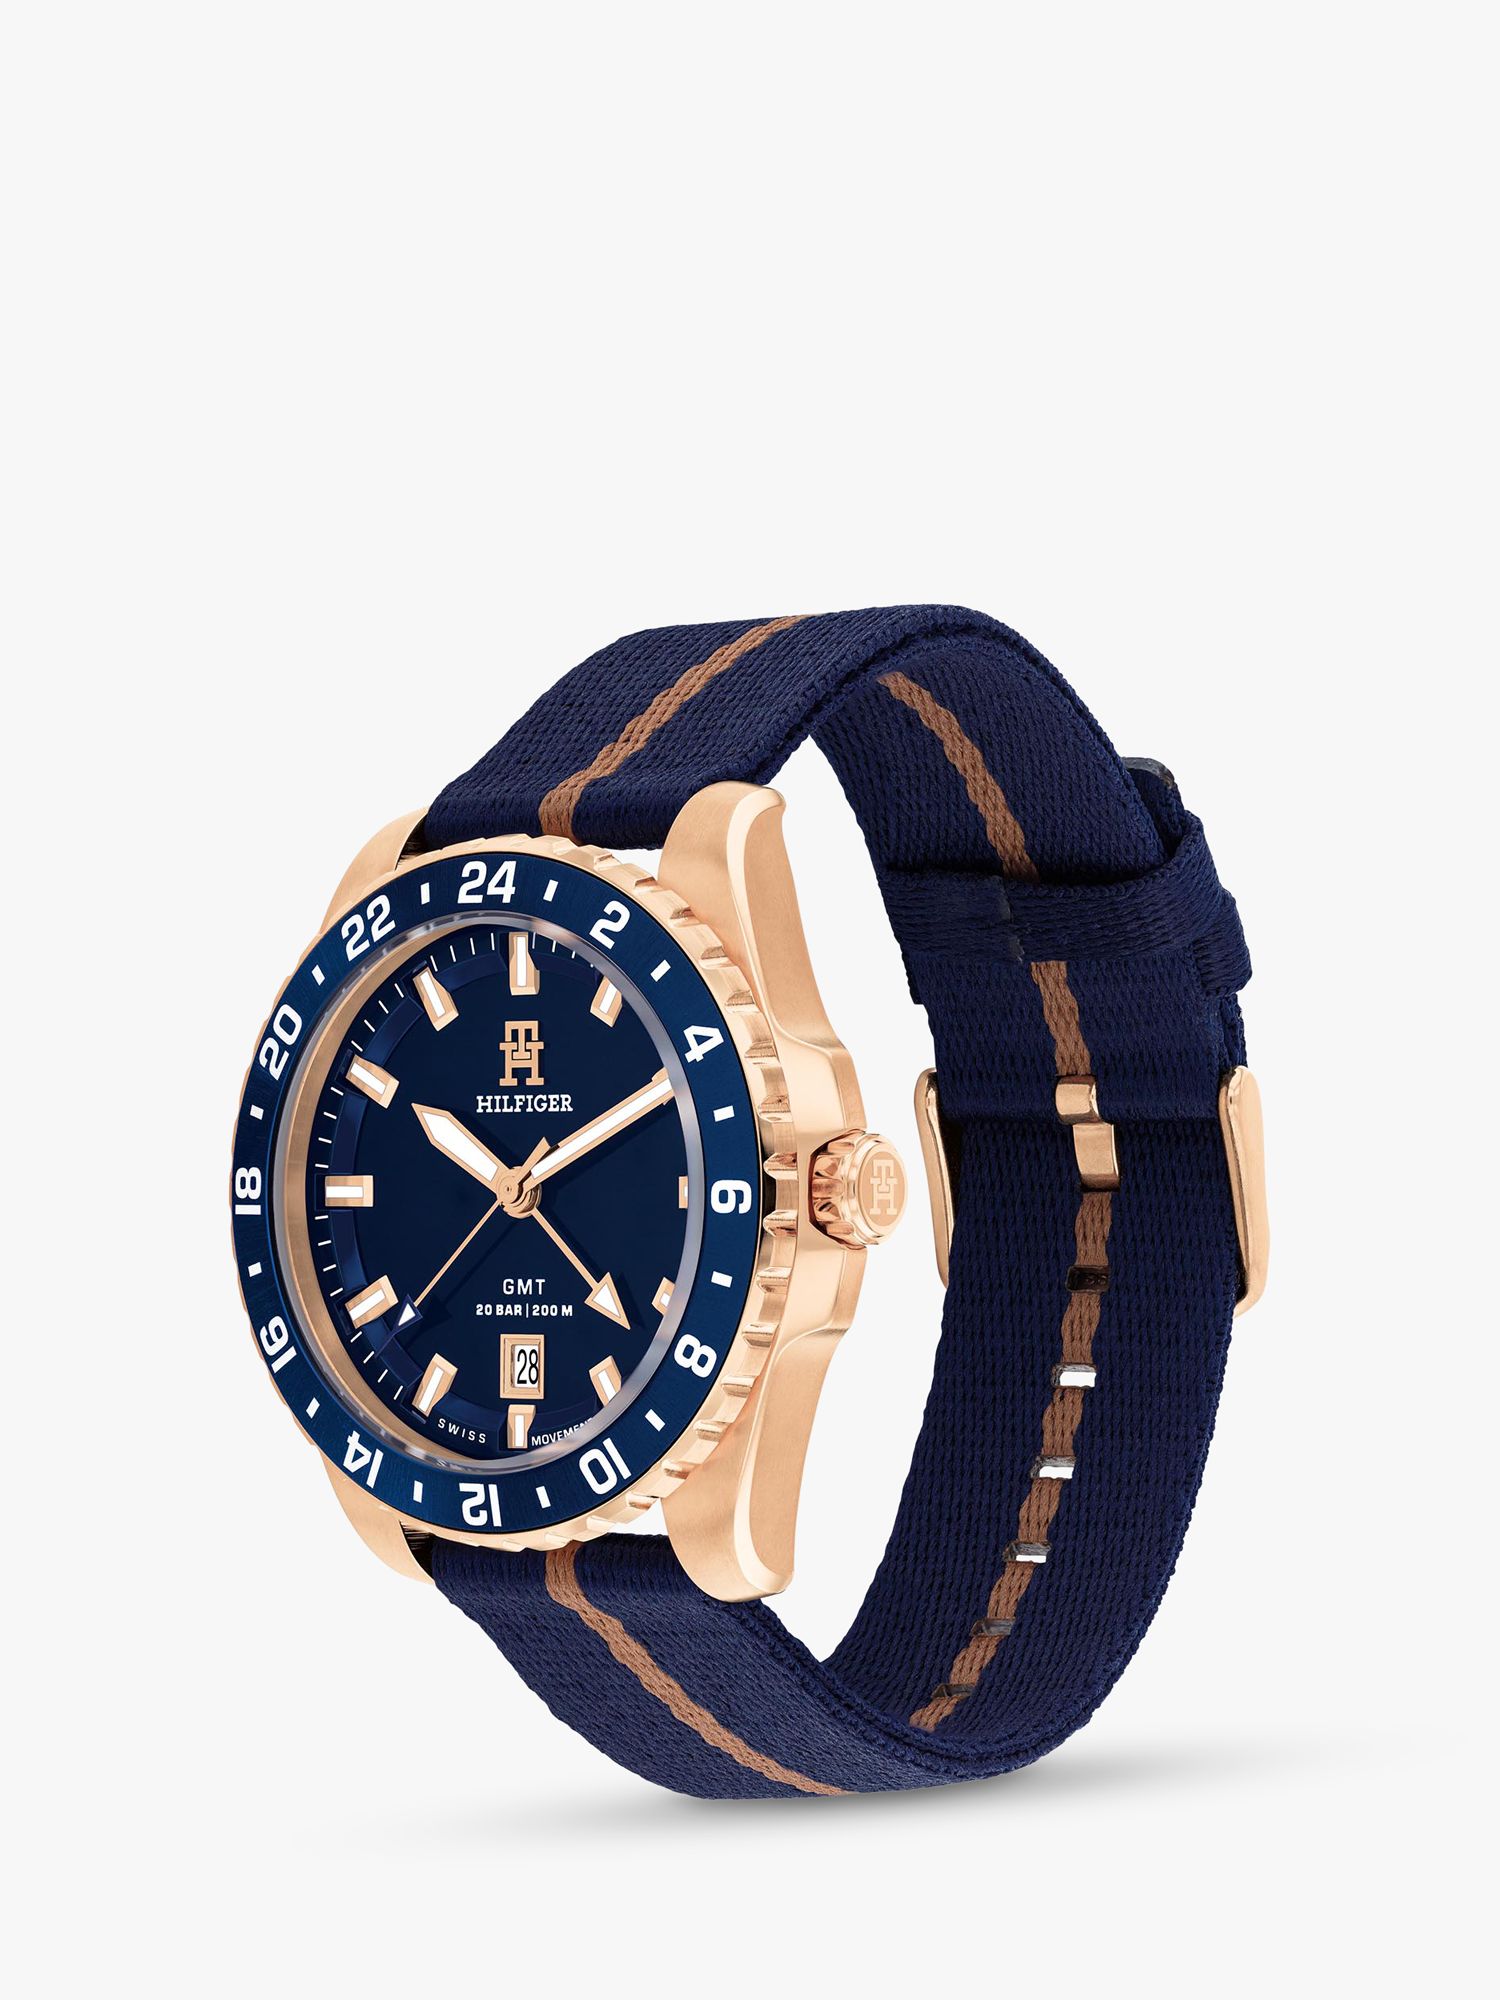 Buy Tommy Hilfiger 1792130 Refined Sports Luxe Swiss GMT Movement Watch, Blue/Rose Gold Online at johnlewis.com